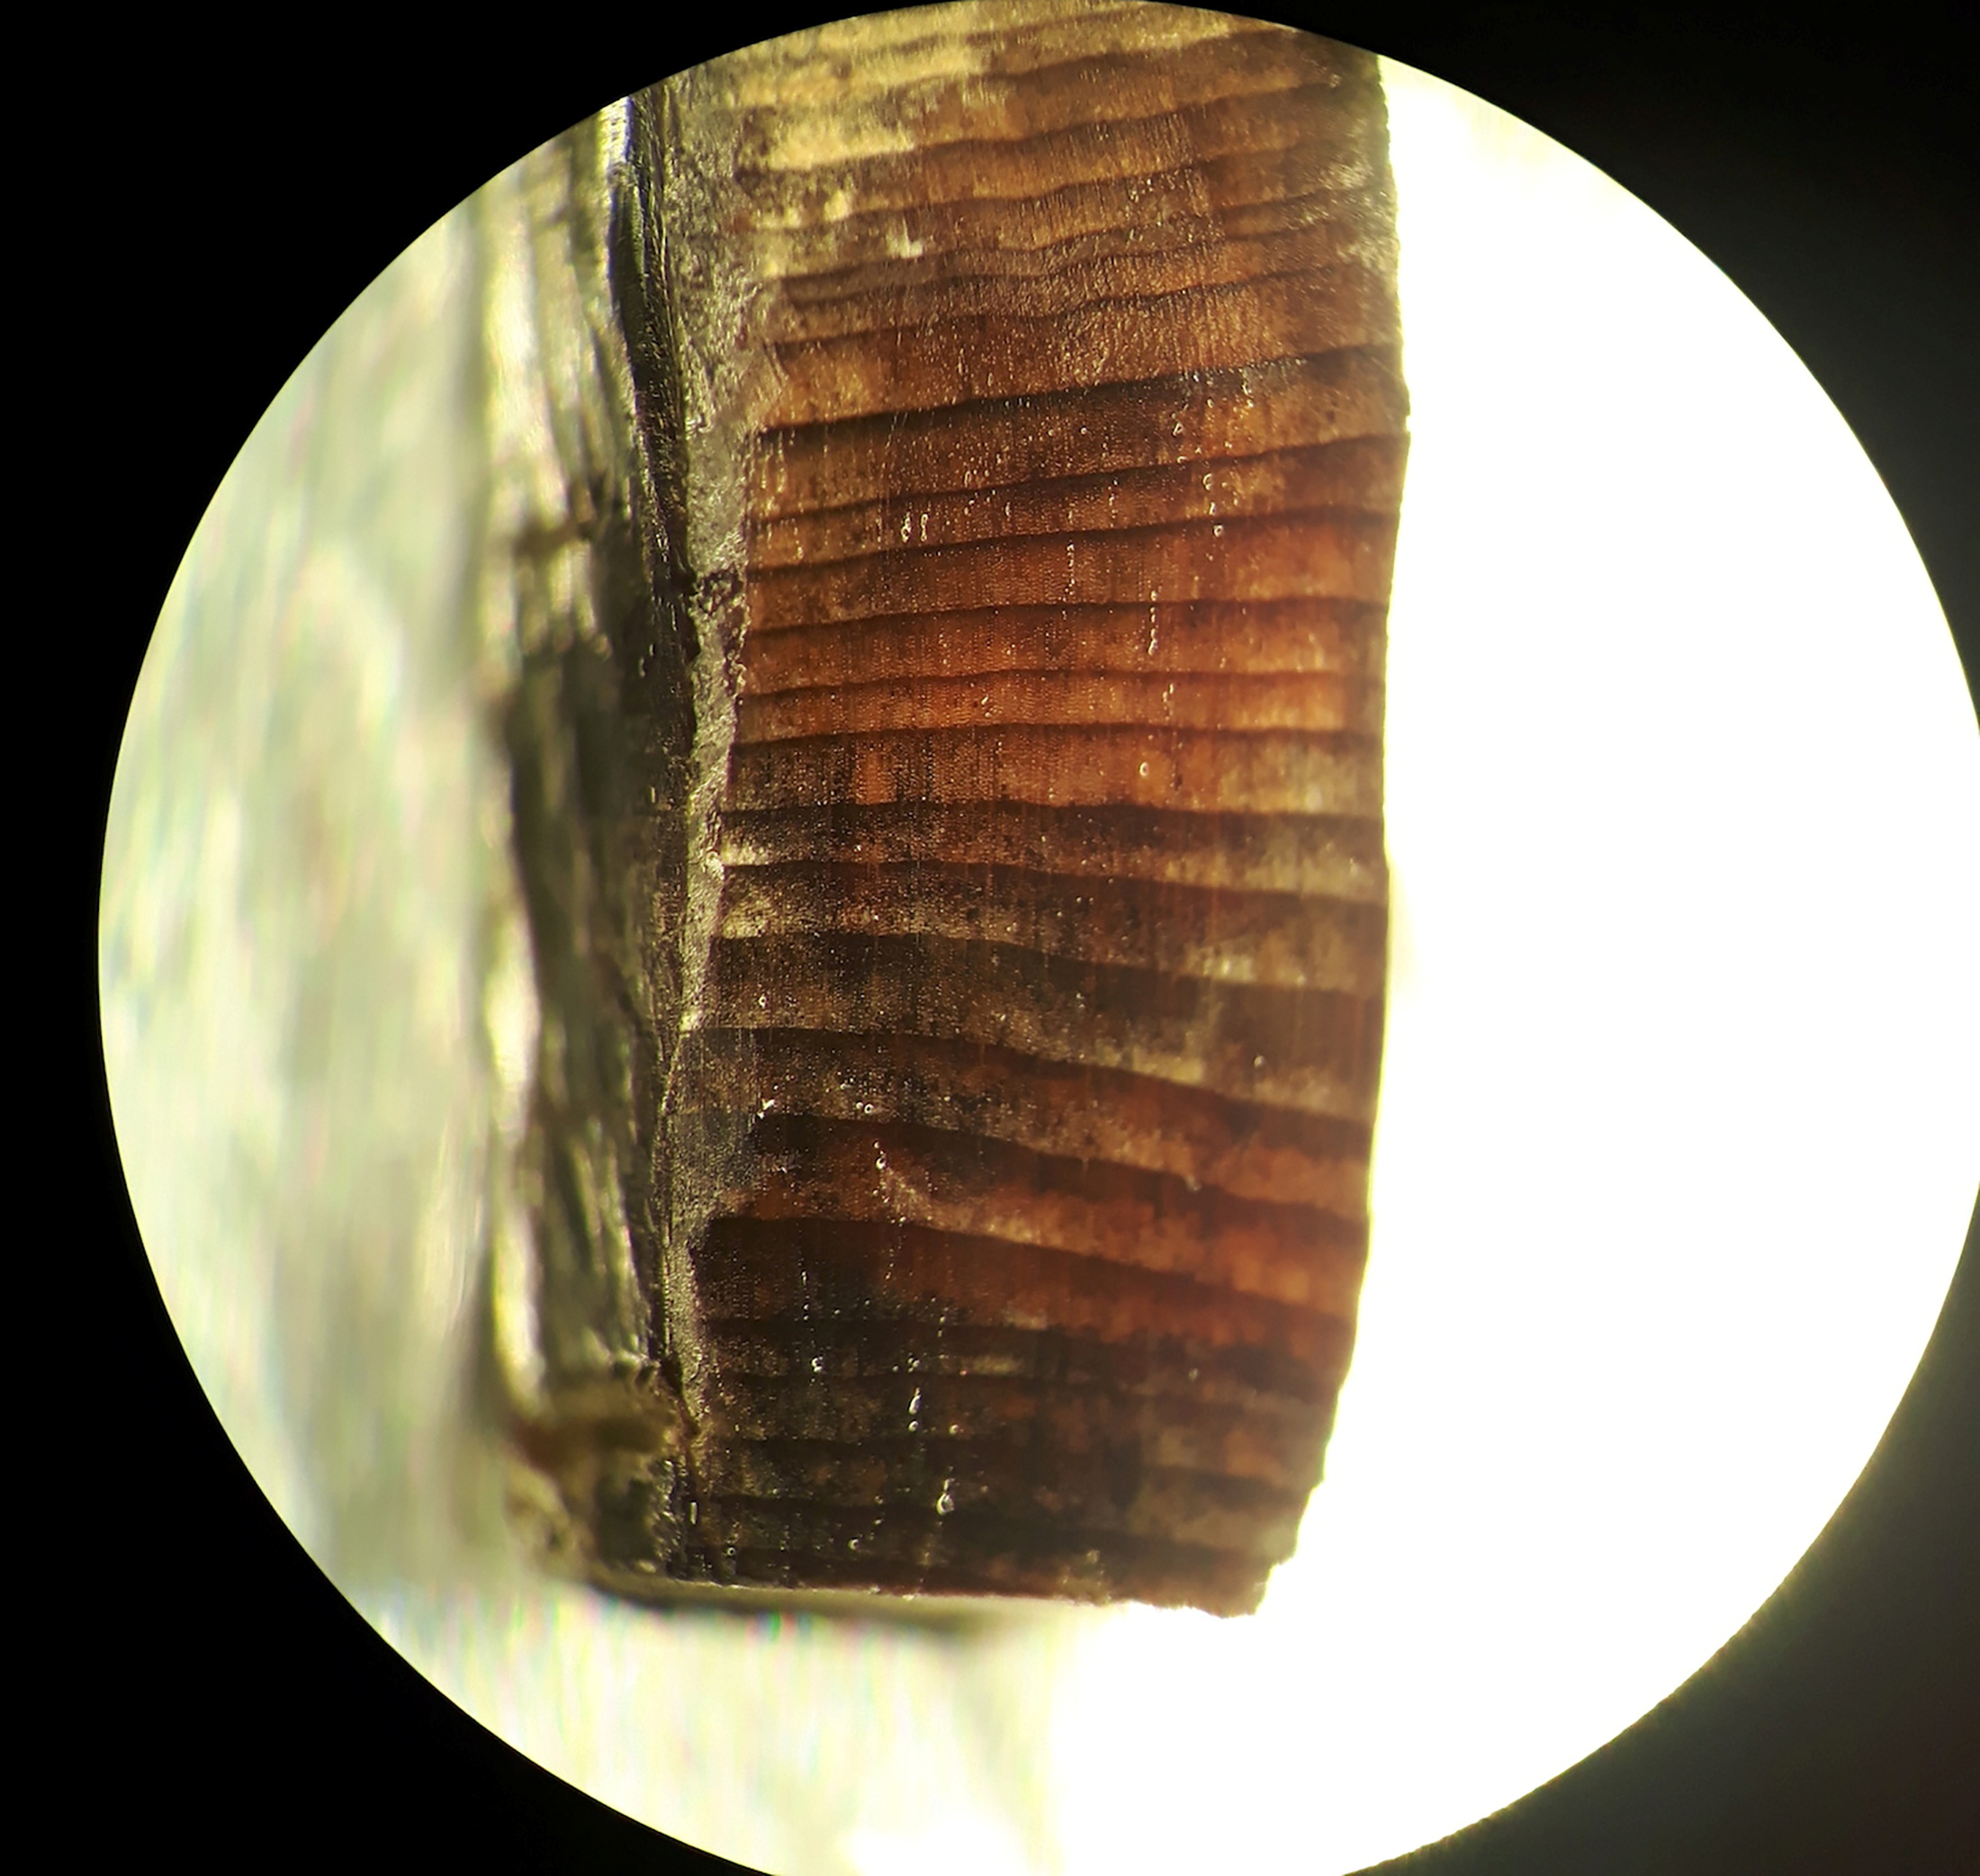 A wood fragment from the Norse layers at the L’Anse aux Meadows Viking settlement established 1,000 years ago near Hay Cove, Newfoundland, Canada is seen in an undated microscopic image. Petra Doeve/Handout via REUTERS